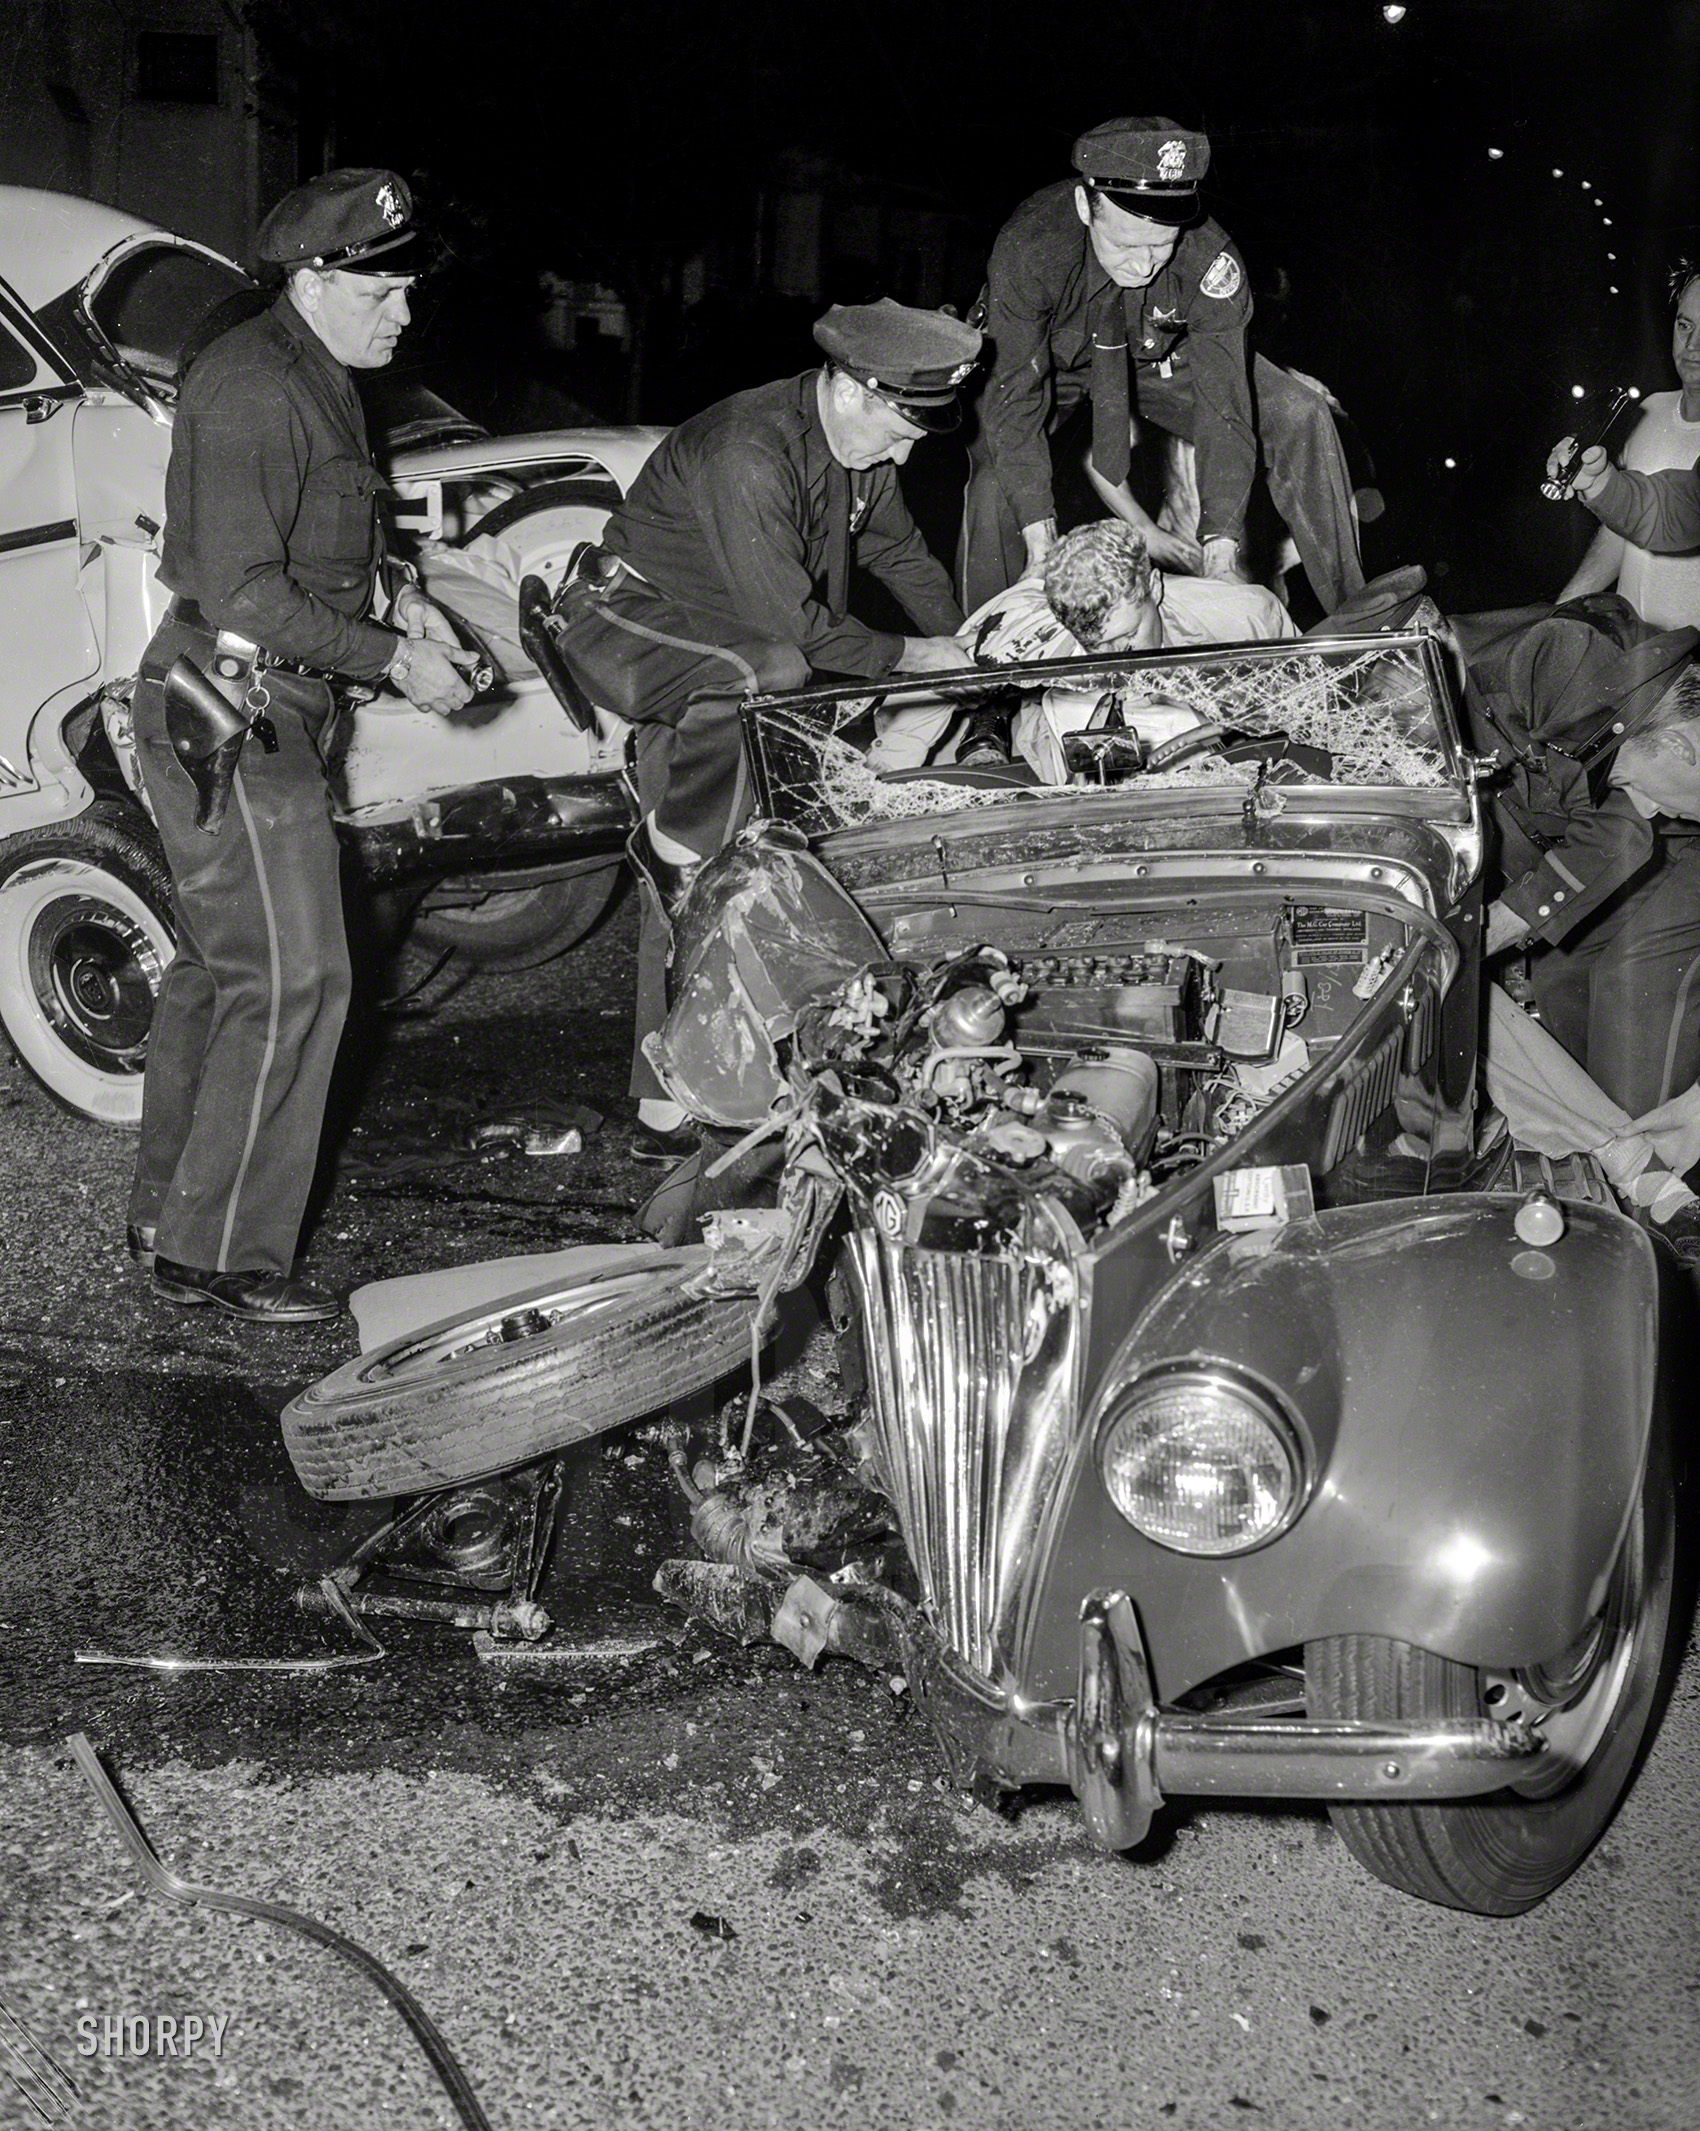 Oakland, Calif., circa 1956. "Traffic Division first aid." This holiday weekend, let's be careful out there! 4x5 negative from the News Photo Archive. View full size.